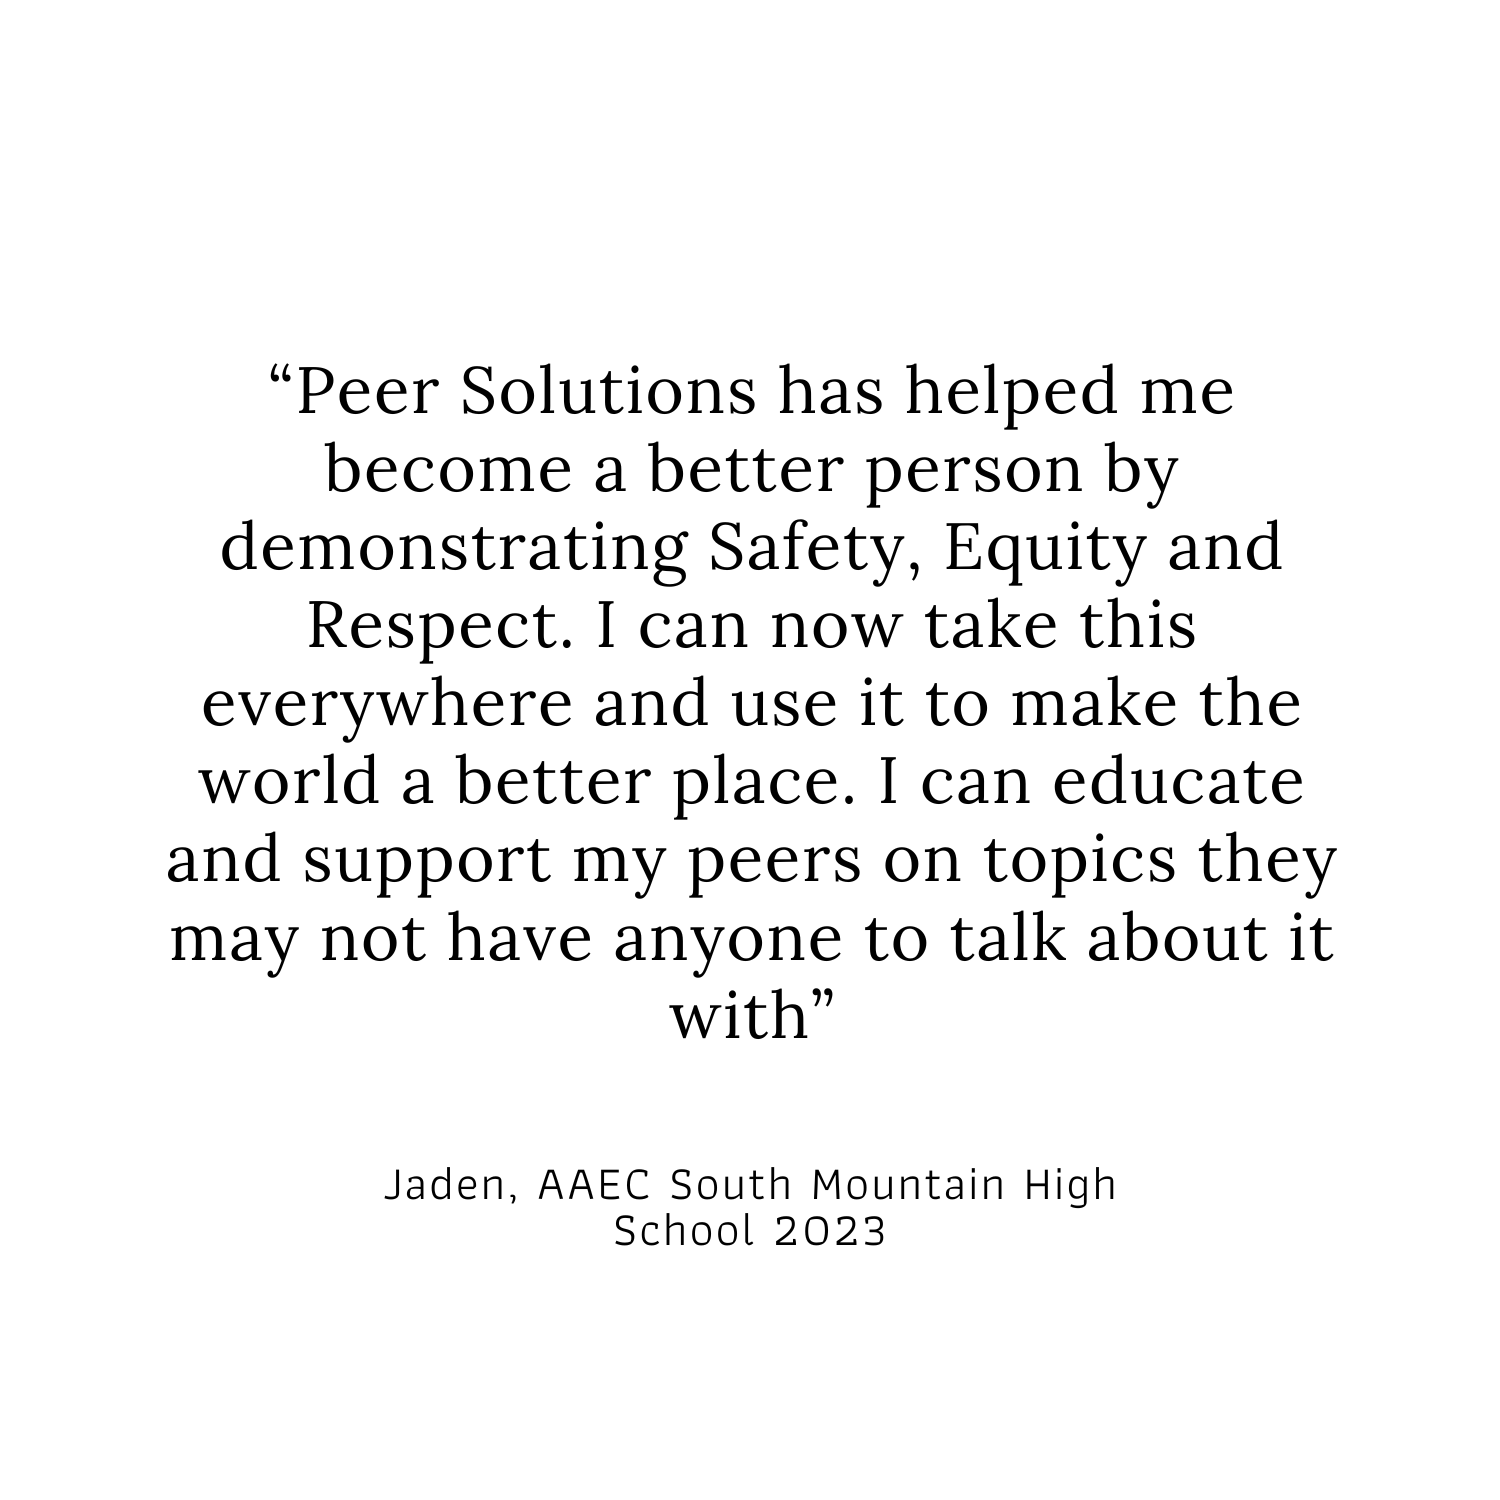 peer solutions has helped me become a better person by becoming a better person.